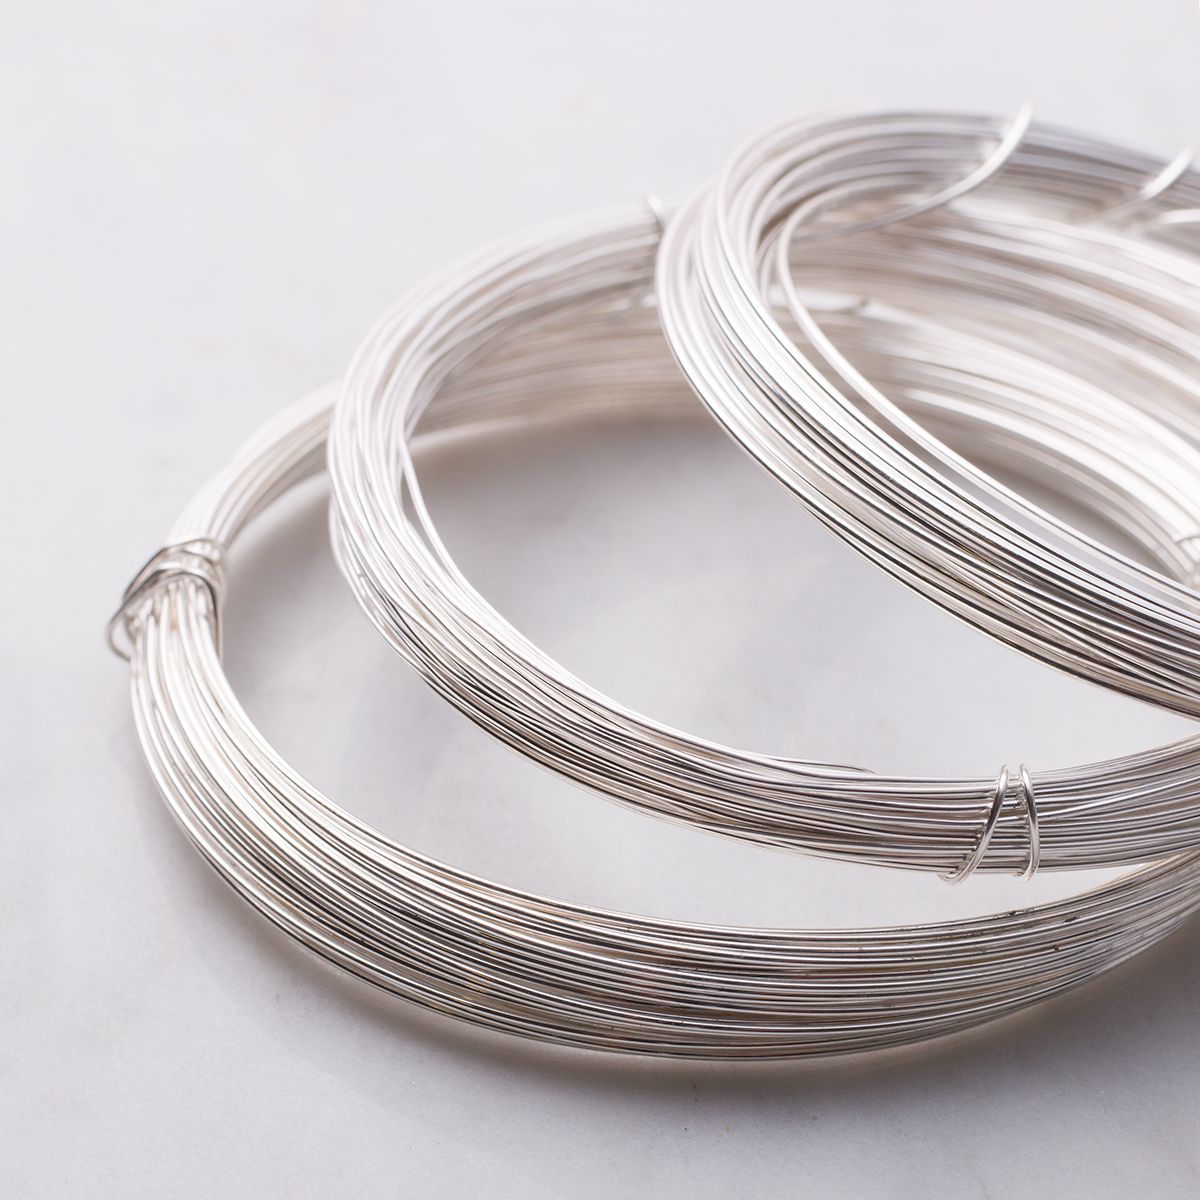 The Difference between Sterling Silver and Silver-Plated Metal